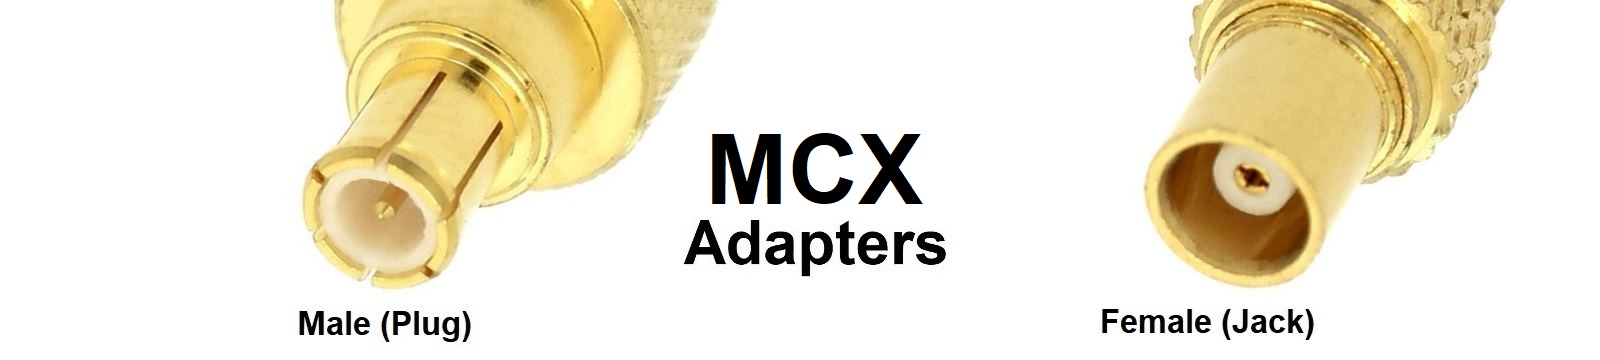 MCX Adapters Category Banner - Max-Gain Systems, Inc.